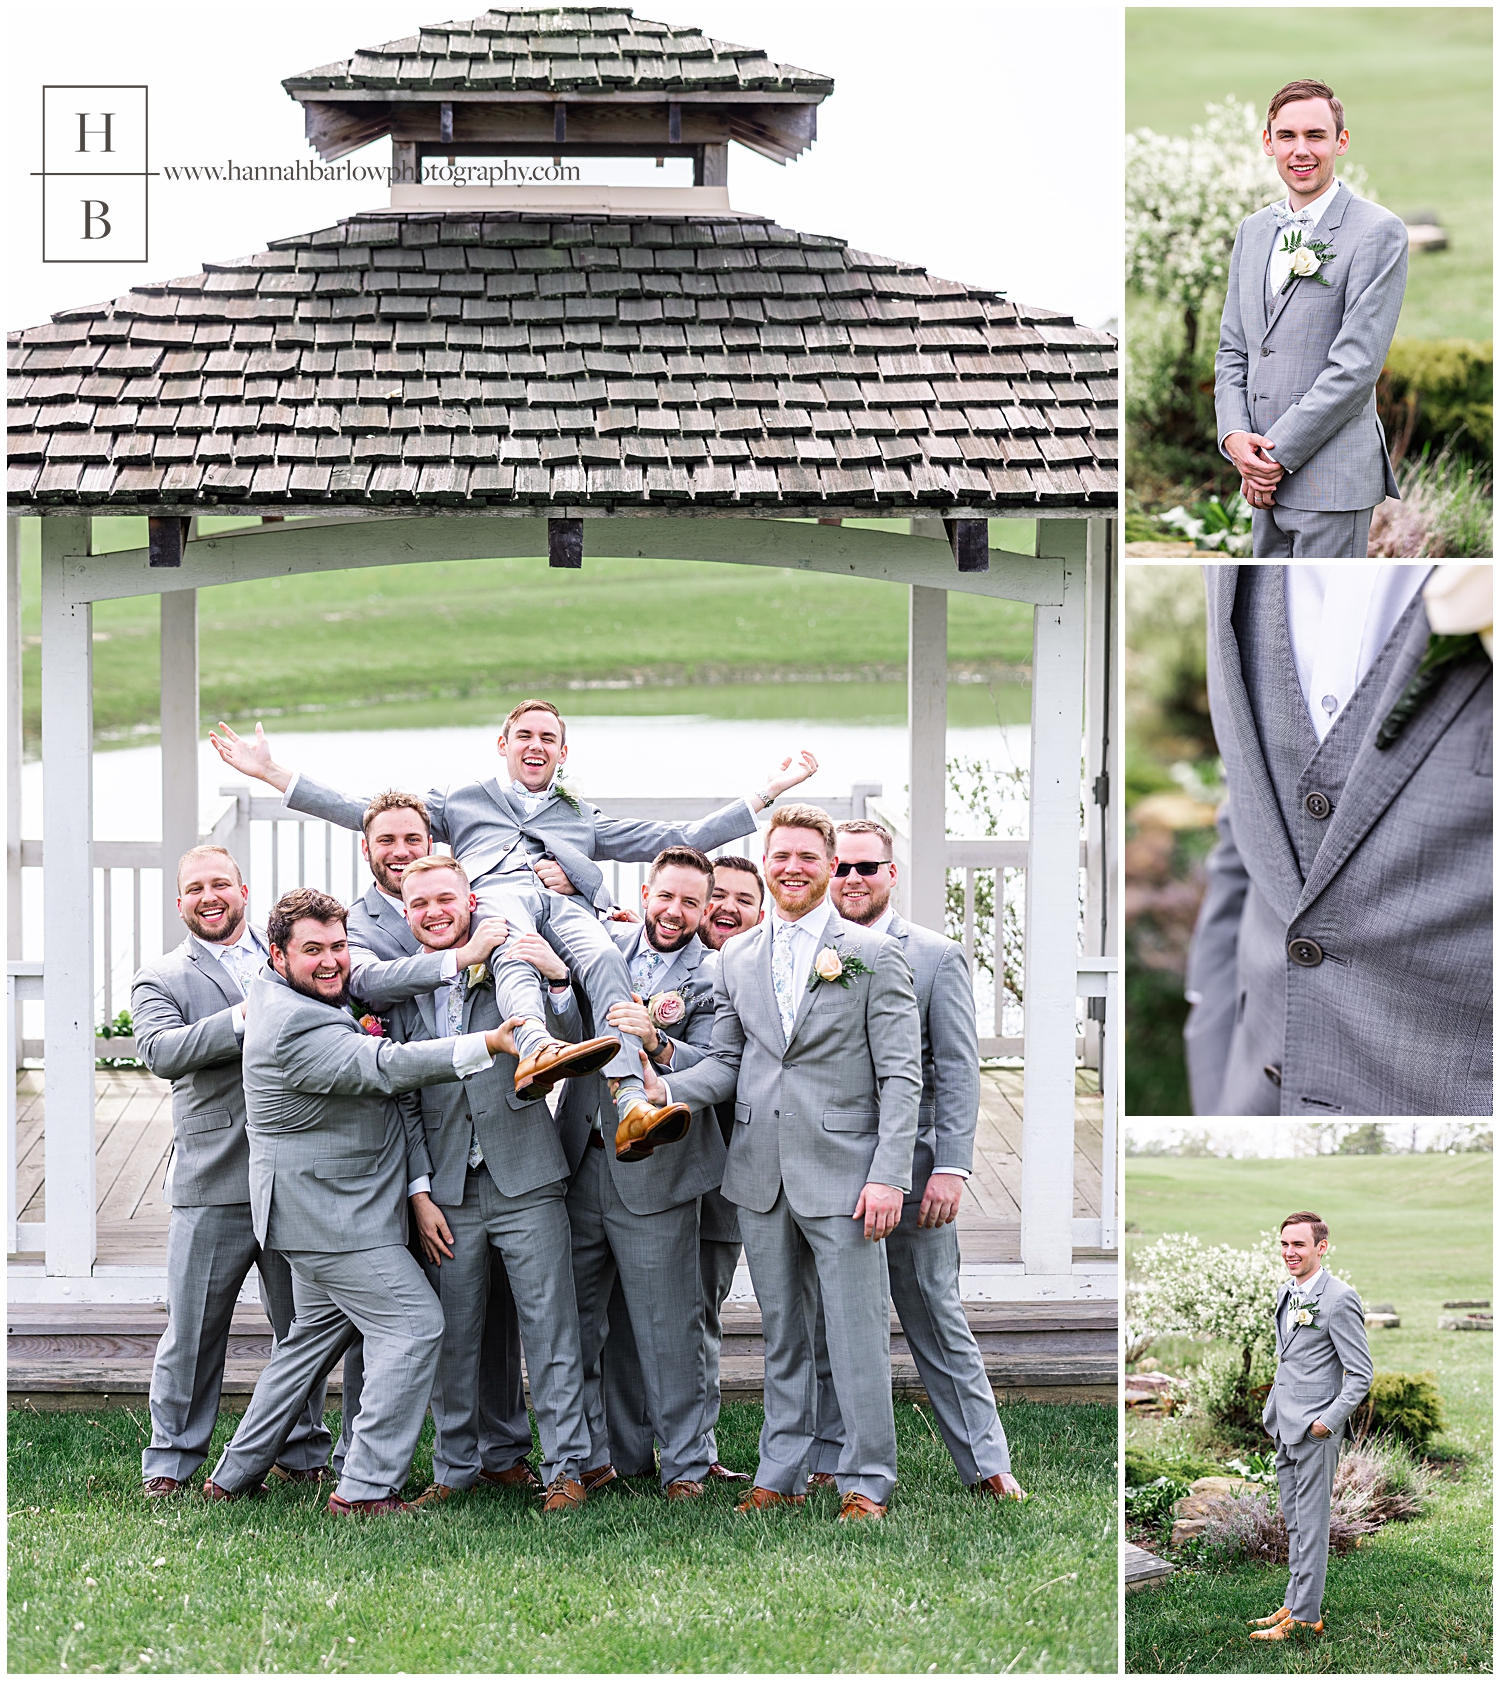 Groom and groomsmen pose for photos in grey tuxes with teal floral ties and bowties.